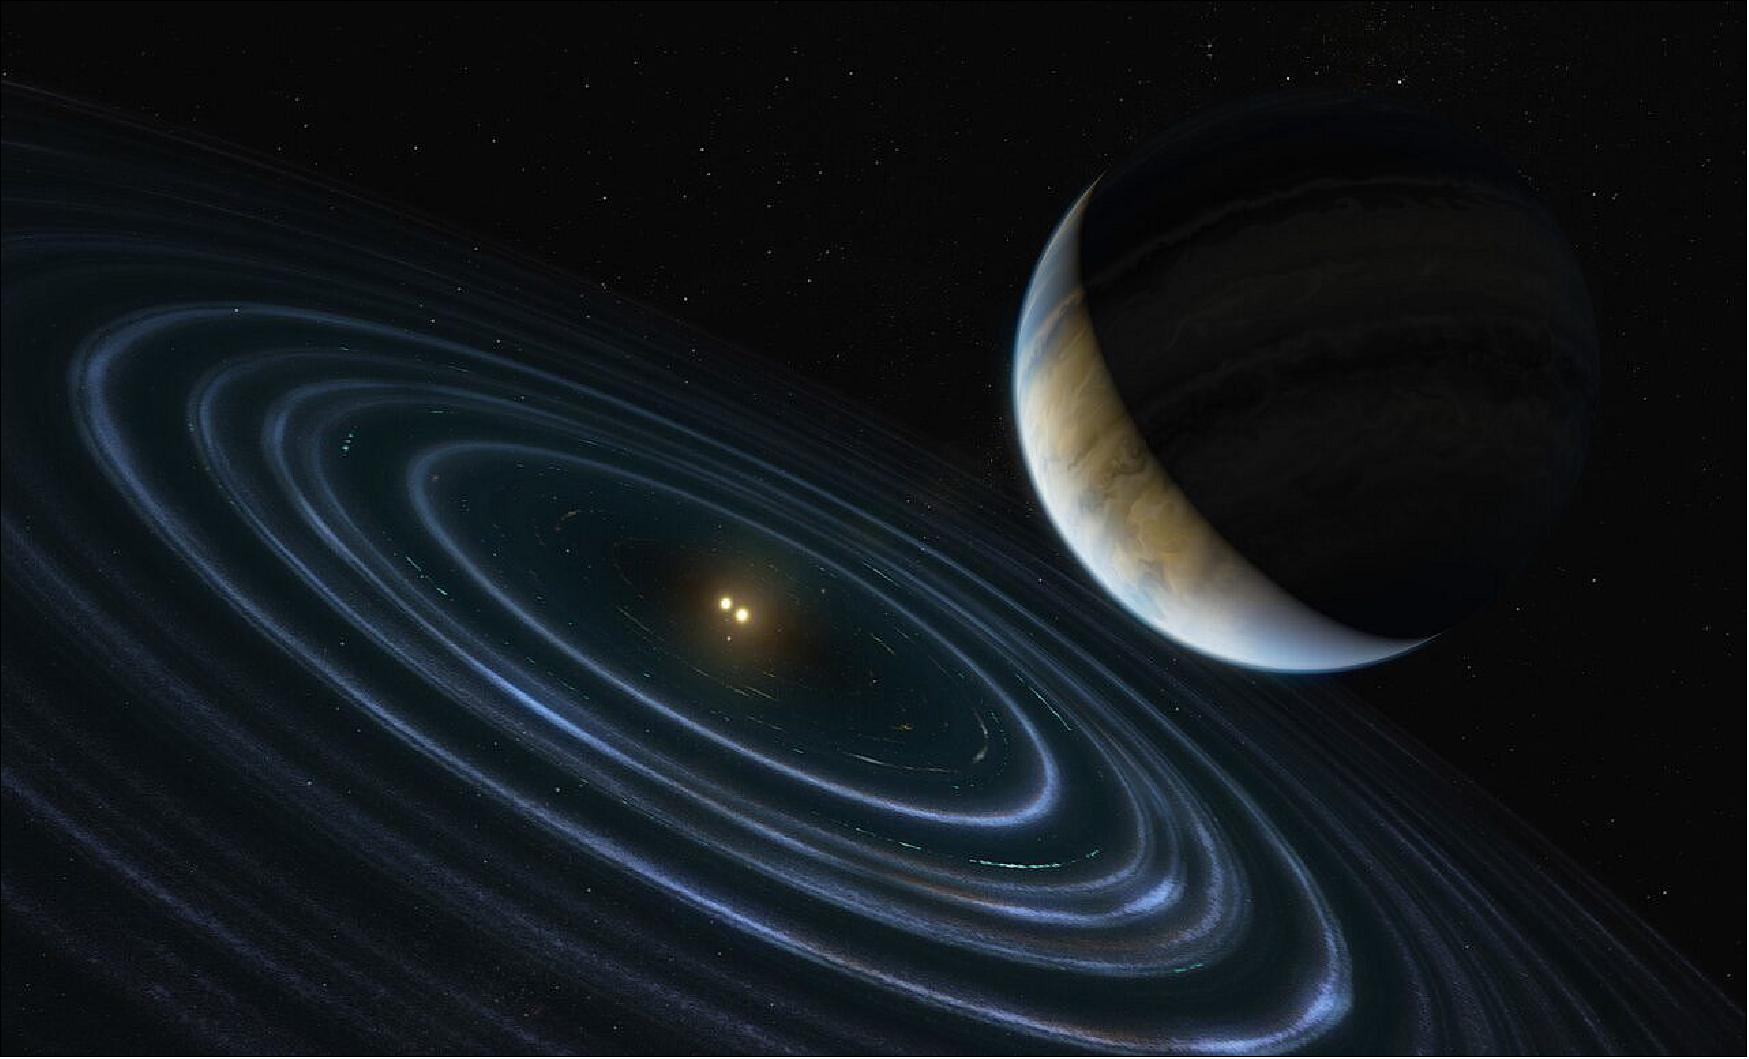 Figure 5: Artist’s Impression of Exoplanet HD 106906b. This 11-Jupiter-mass exoplanet called HD106906 b occupies an unlikely orbit around a double star 336 light-years away and it may be offering clues to something that might be much closer to home: a hypothesized distant member of our Solar System dubbed “Planet Nine.” This is the first time that astronomers have been able to measure the motion of a massive Jupiter-like planet that is orbiting very far away from its host stars and visible debris disc (image credit: ESA/Hubble, M. Kornmesser)